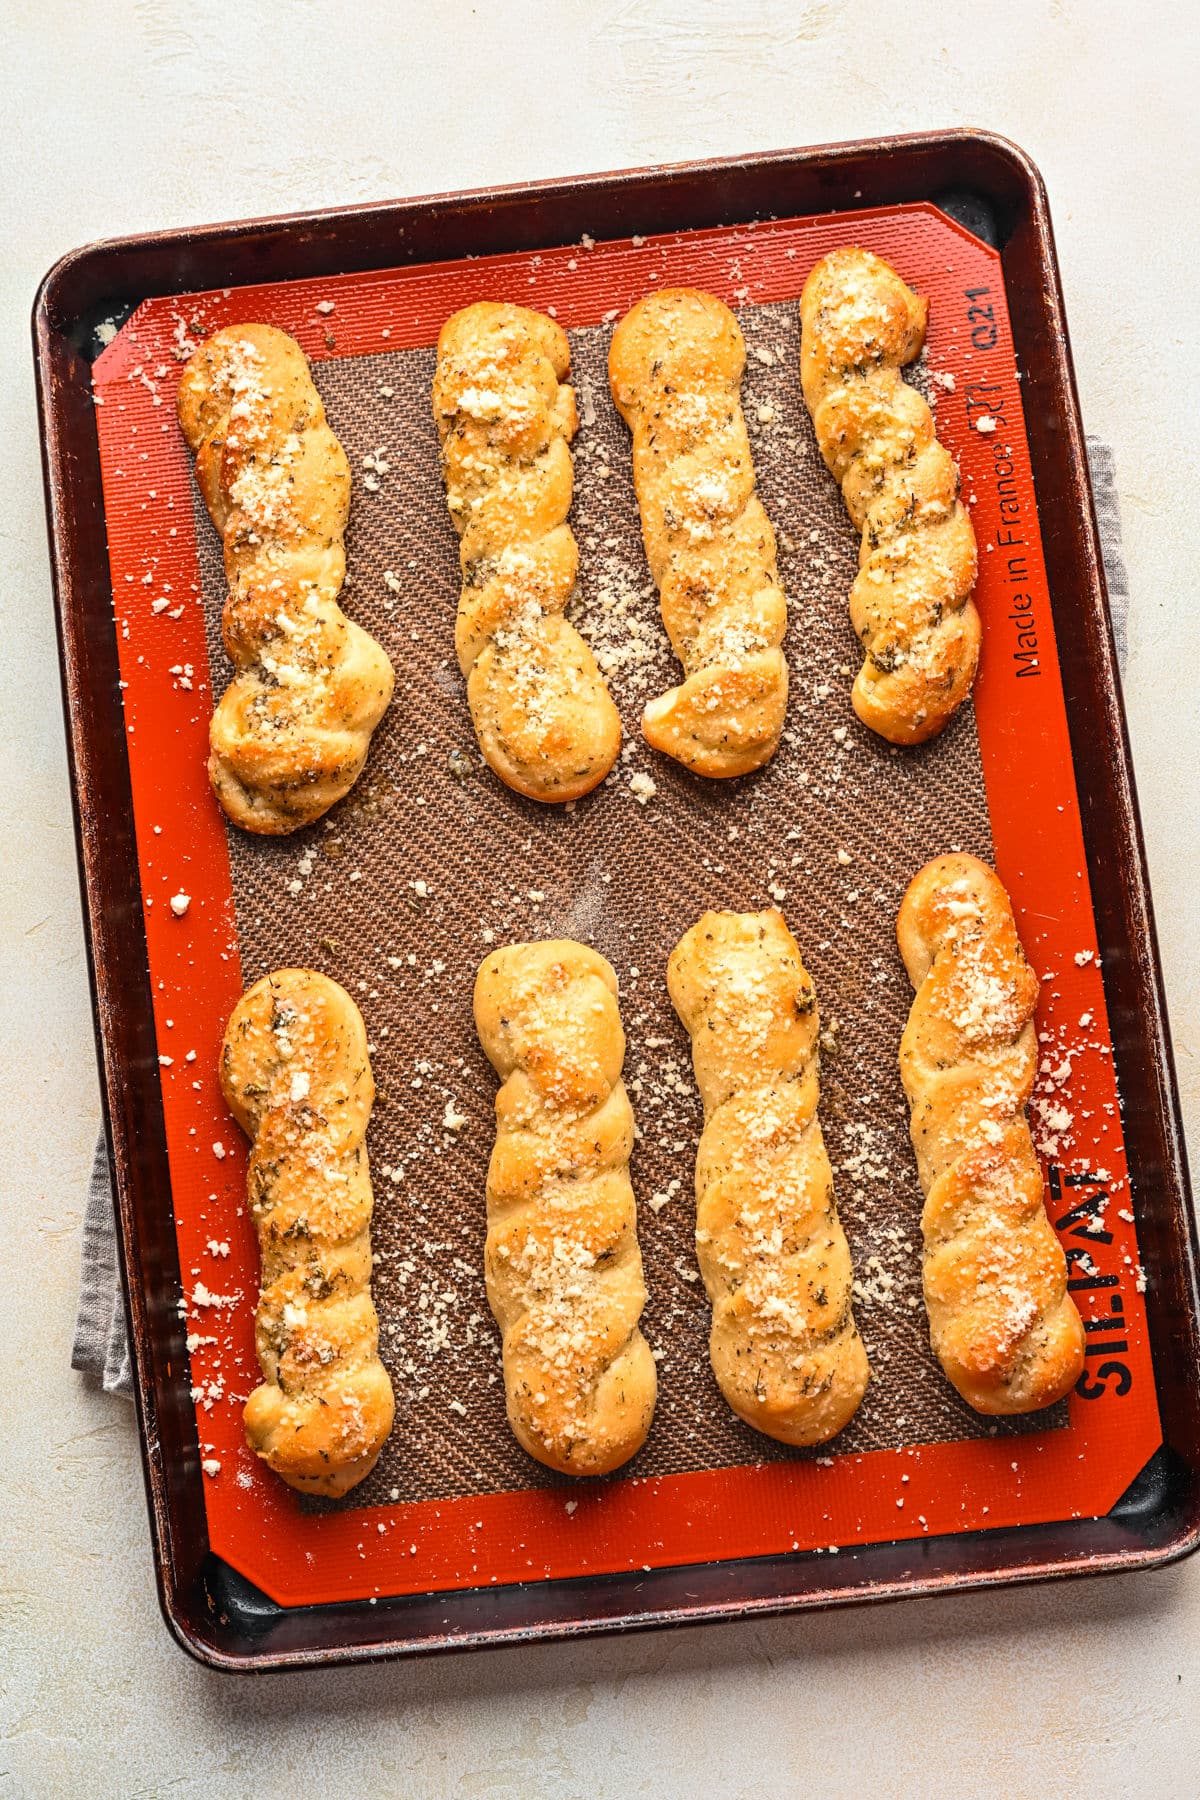 Homemade breadsticks on a baking pan on top of a kitchen towel.